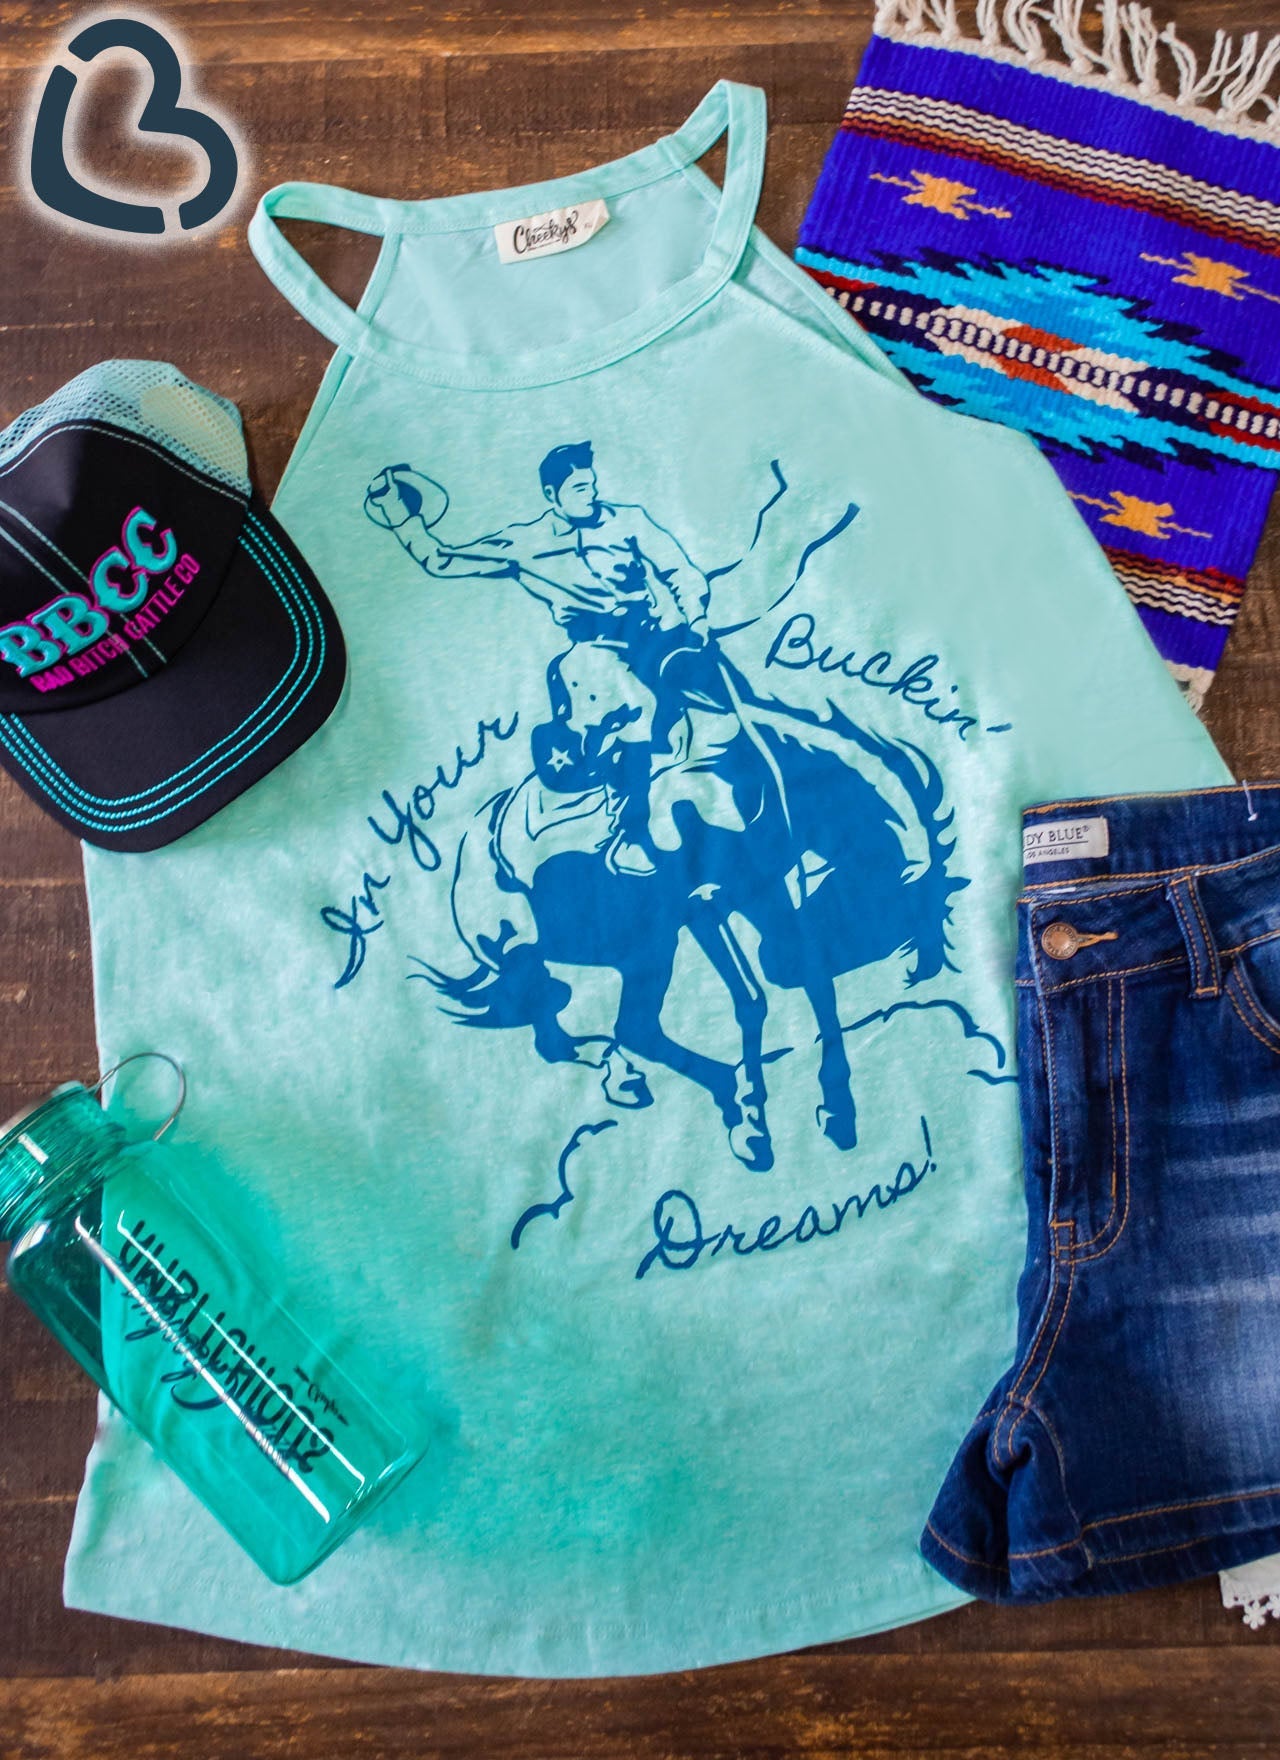 In Your Bucking Dreams Tank on Belize Cheekys Apparel 23 